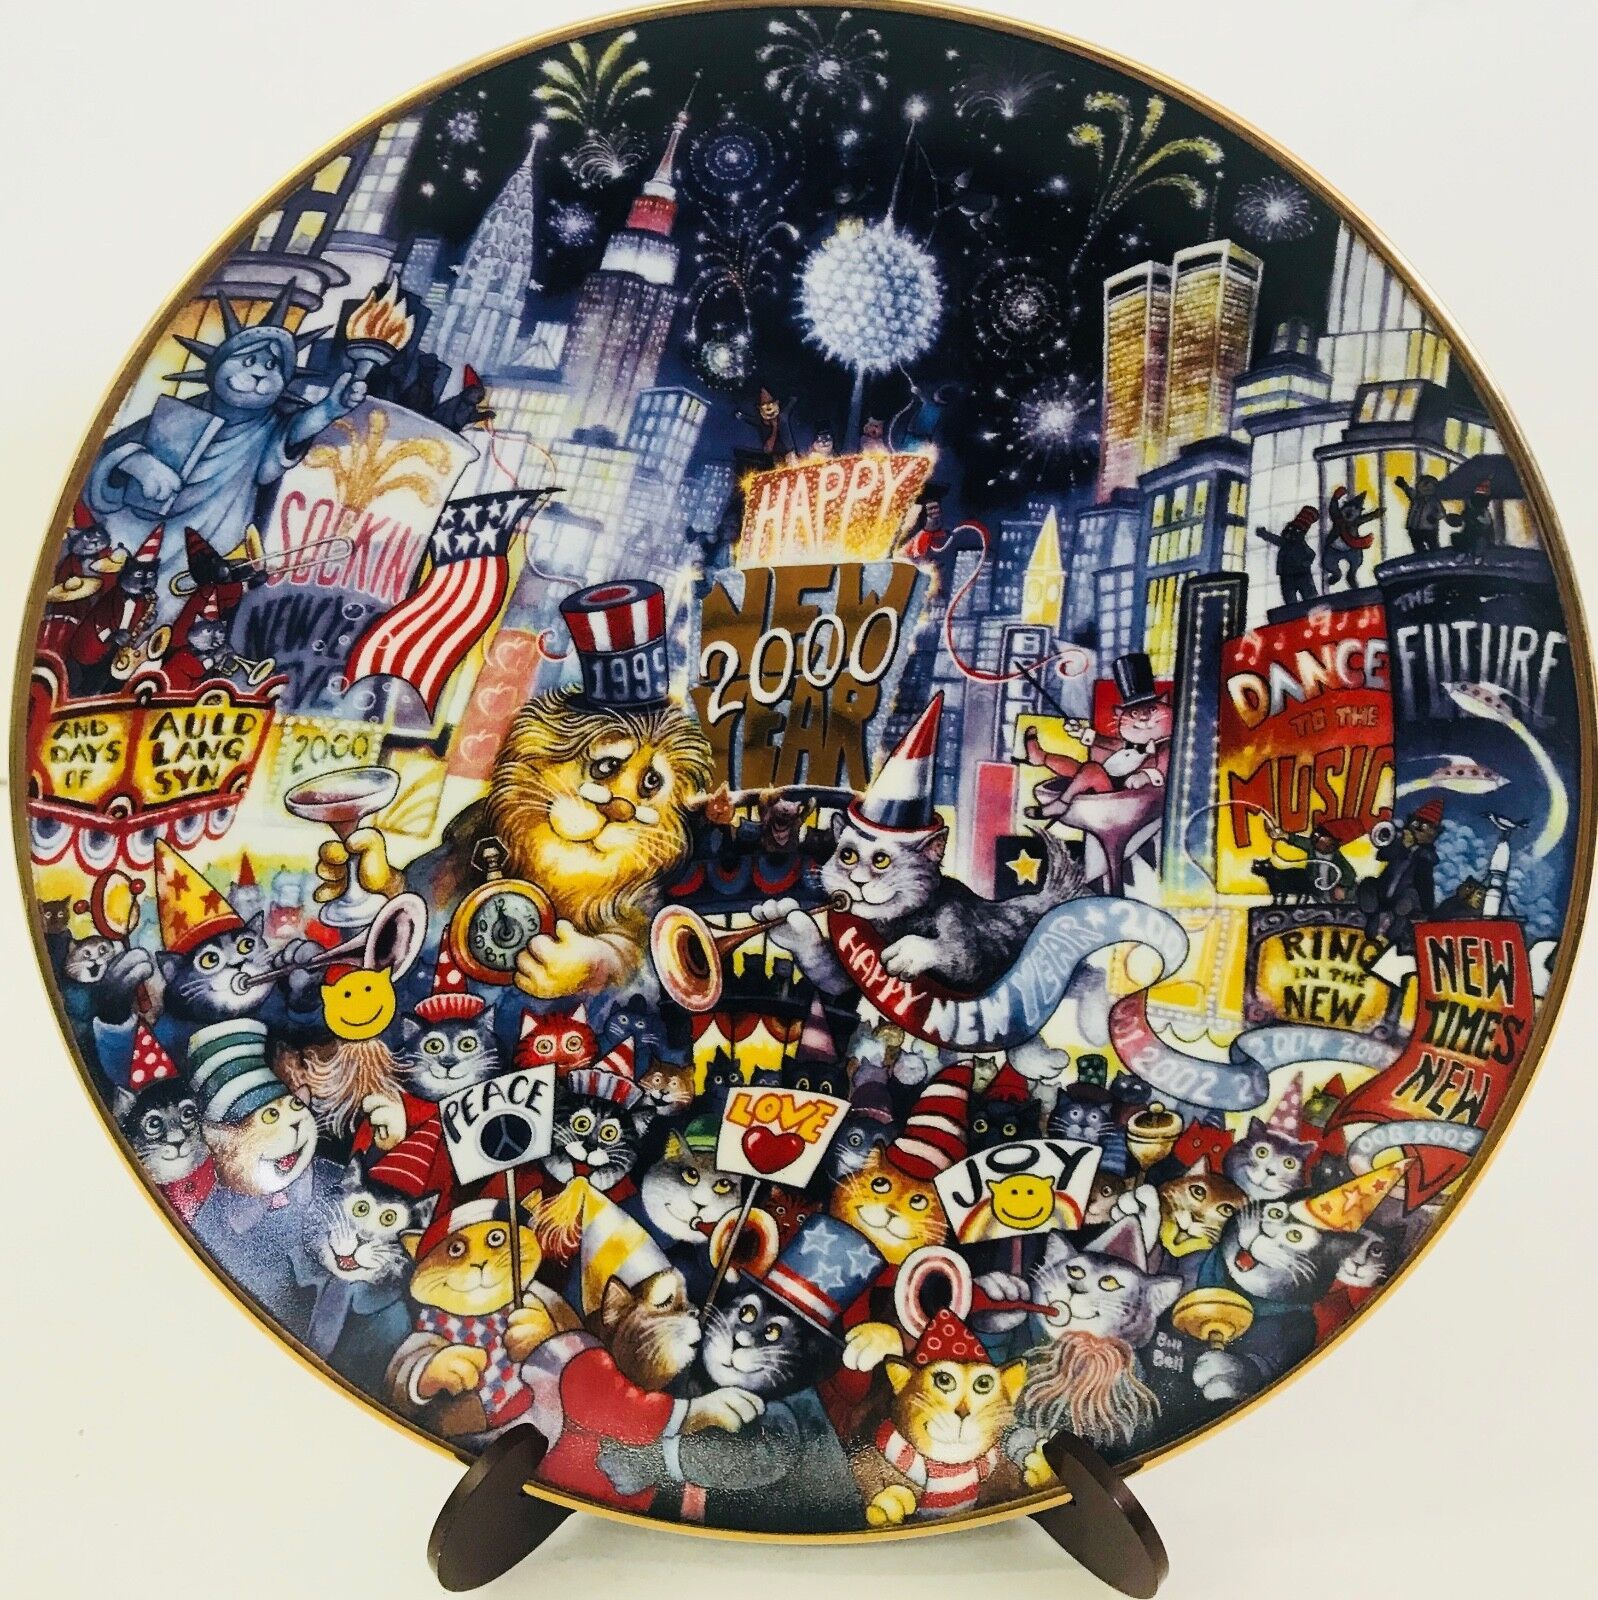 Franklin Mint Plate Bill Bell Ring In The Mew Millennium 2000 Cats Limited Ed - $18.80